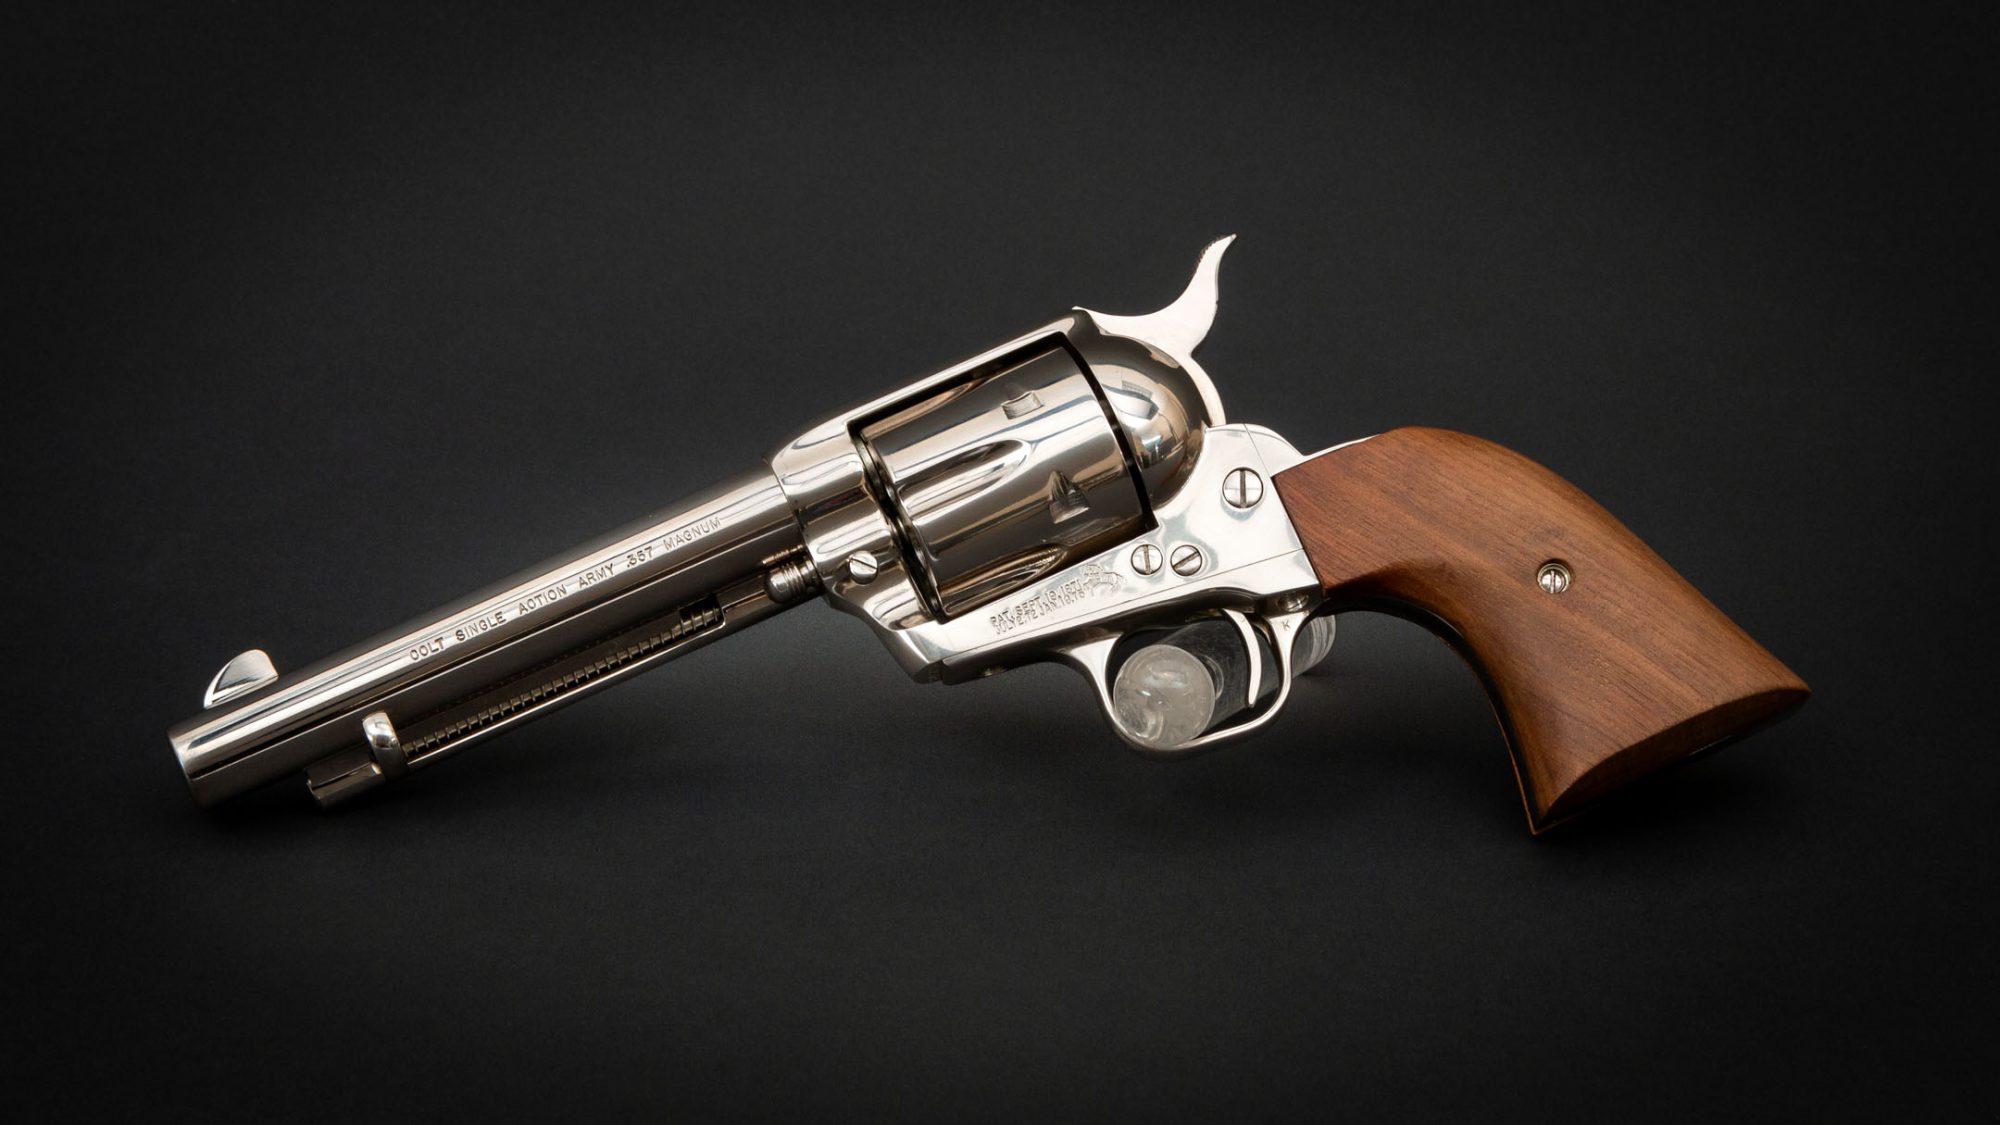 Nickel plated Colt SAA revolver in .357 Magnum, for sale by Turnbull Restoration Co. of Bloomfield, NY